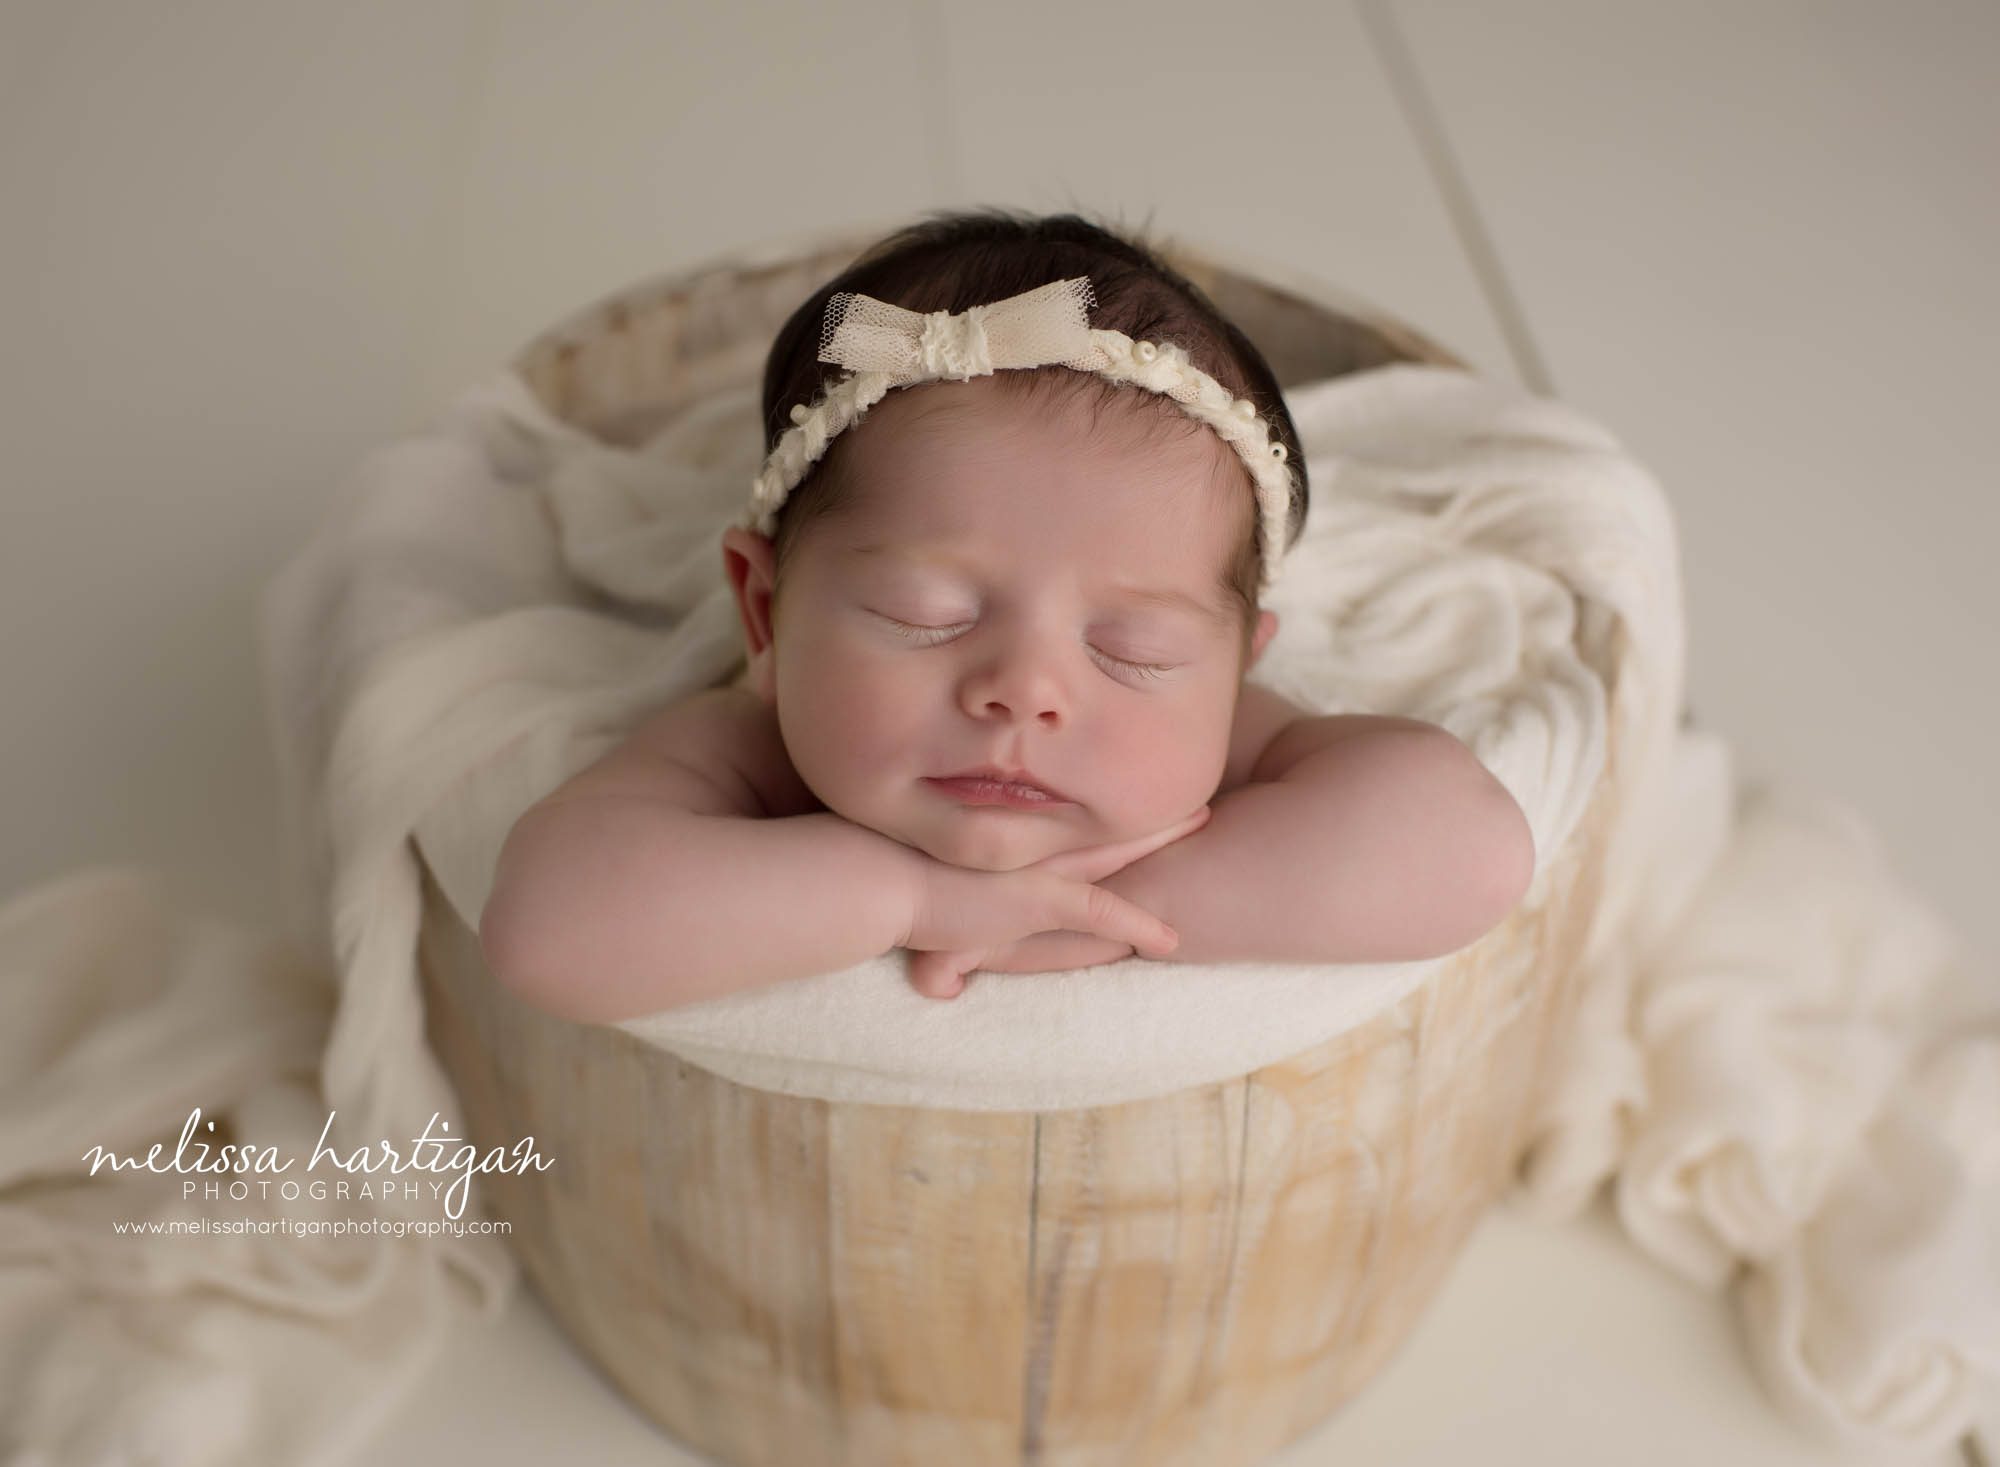 newborn baby girl posed in wooden barrel with bow headband Connecticut newborn photography